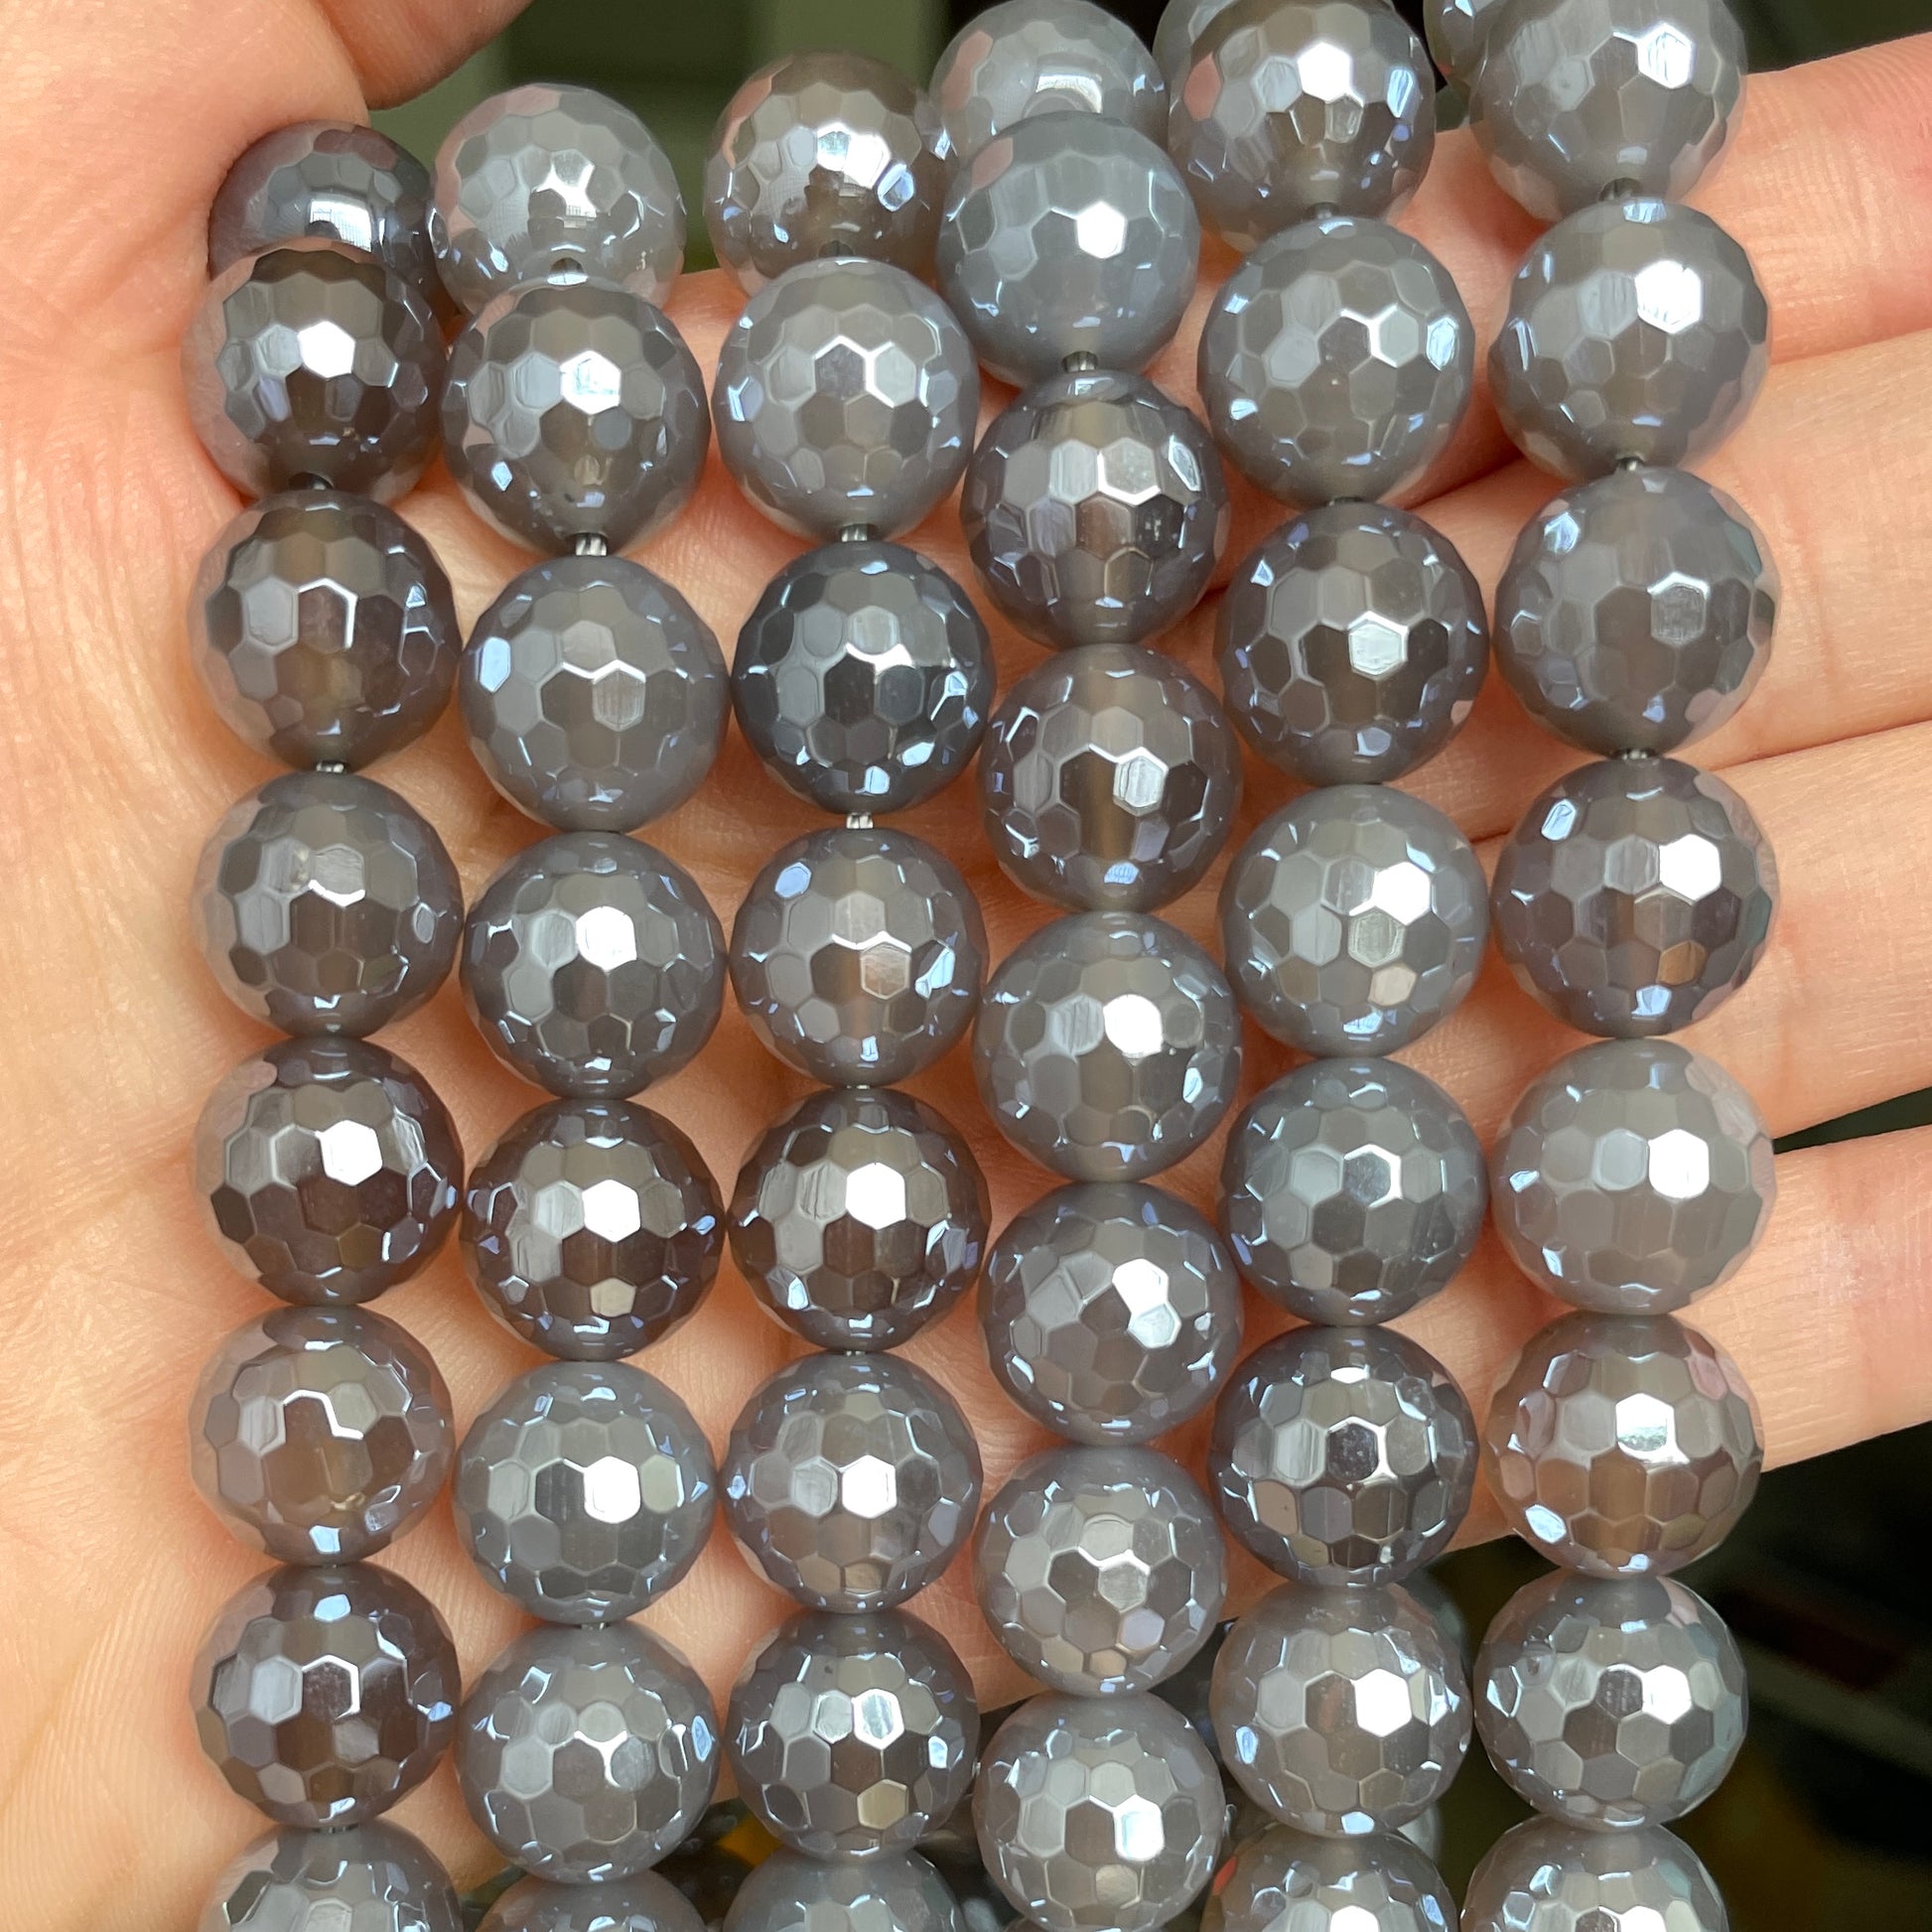 10, 12mm Electroplated Gray Agate Stone Faceted Beads-Grade A Premium Quality Electroplated Beads 12mm Stone Beads New Beads Arrivals Premium Quality Agate Beads Charms Beads Beyond